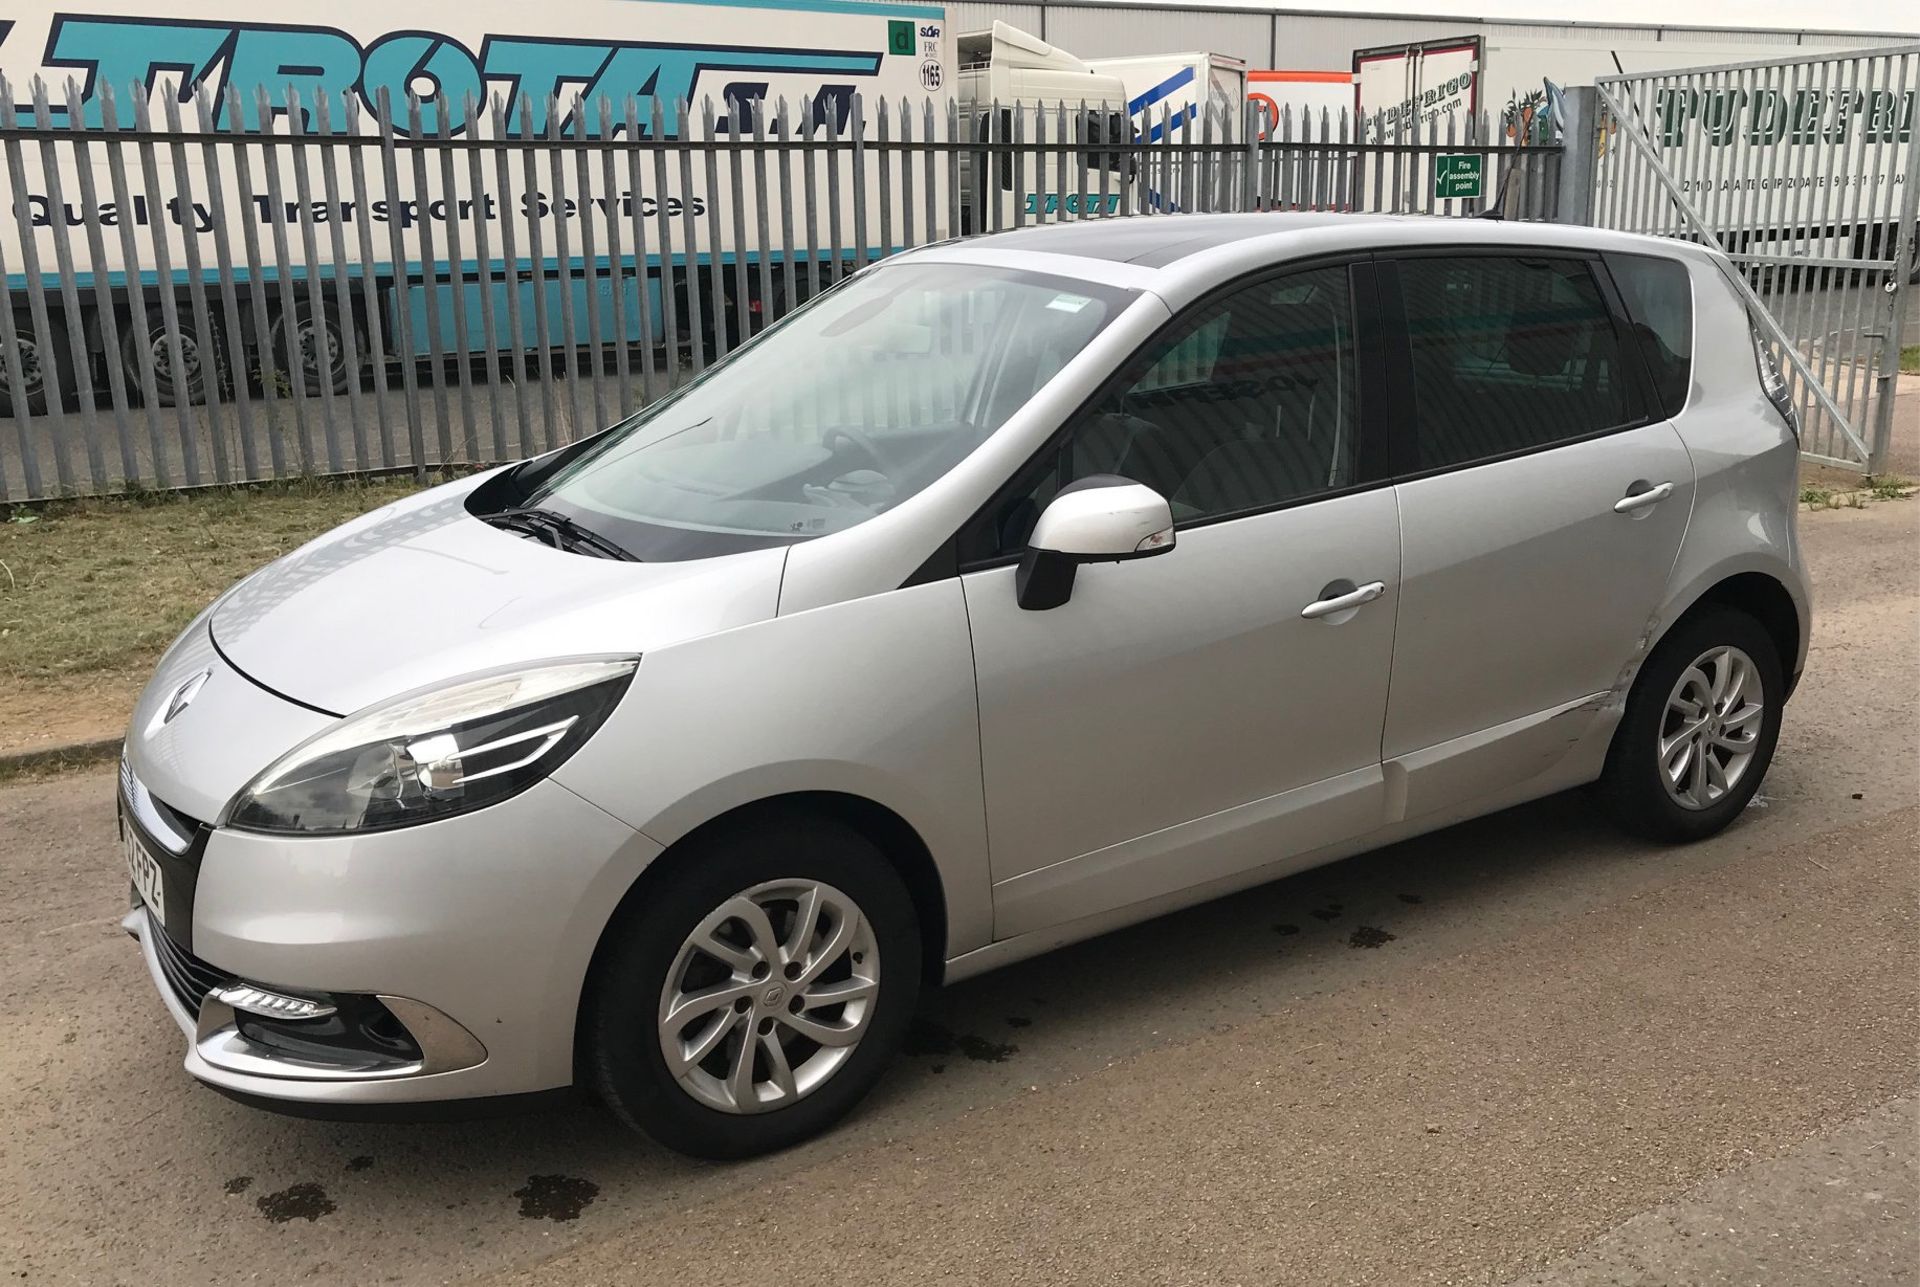 2012 Renault Scenic 1.5 Dci D-Que Tt Energy 5 Dr MPV - CL505 - NO VAT ON THE HAMMER - Location: Corb - Image 11 of 15